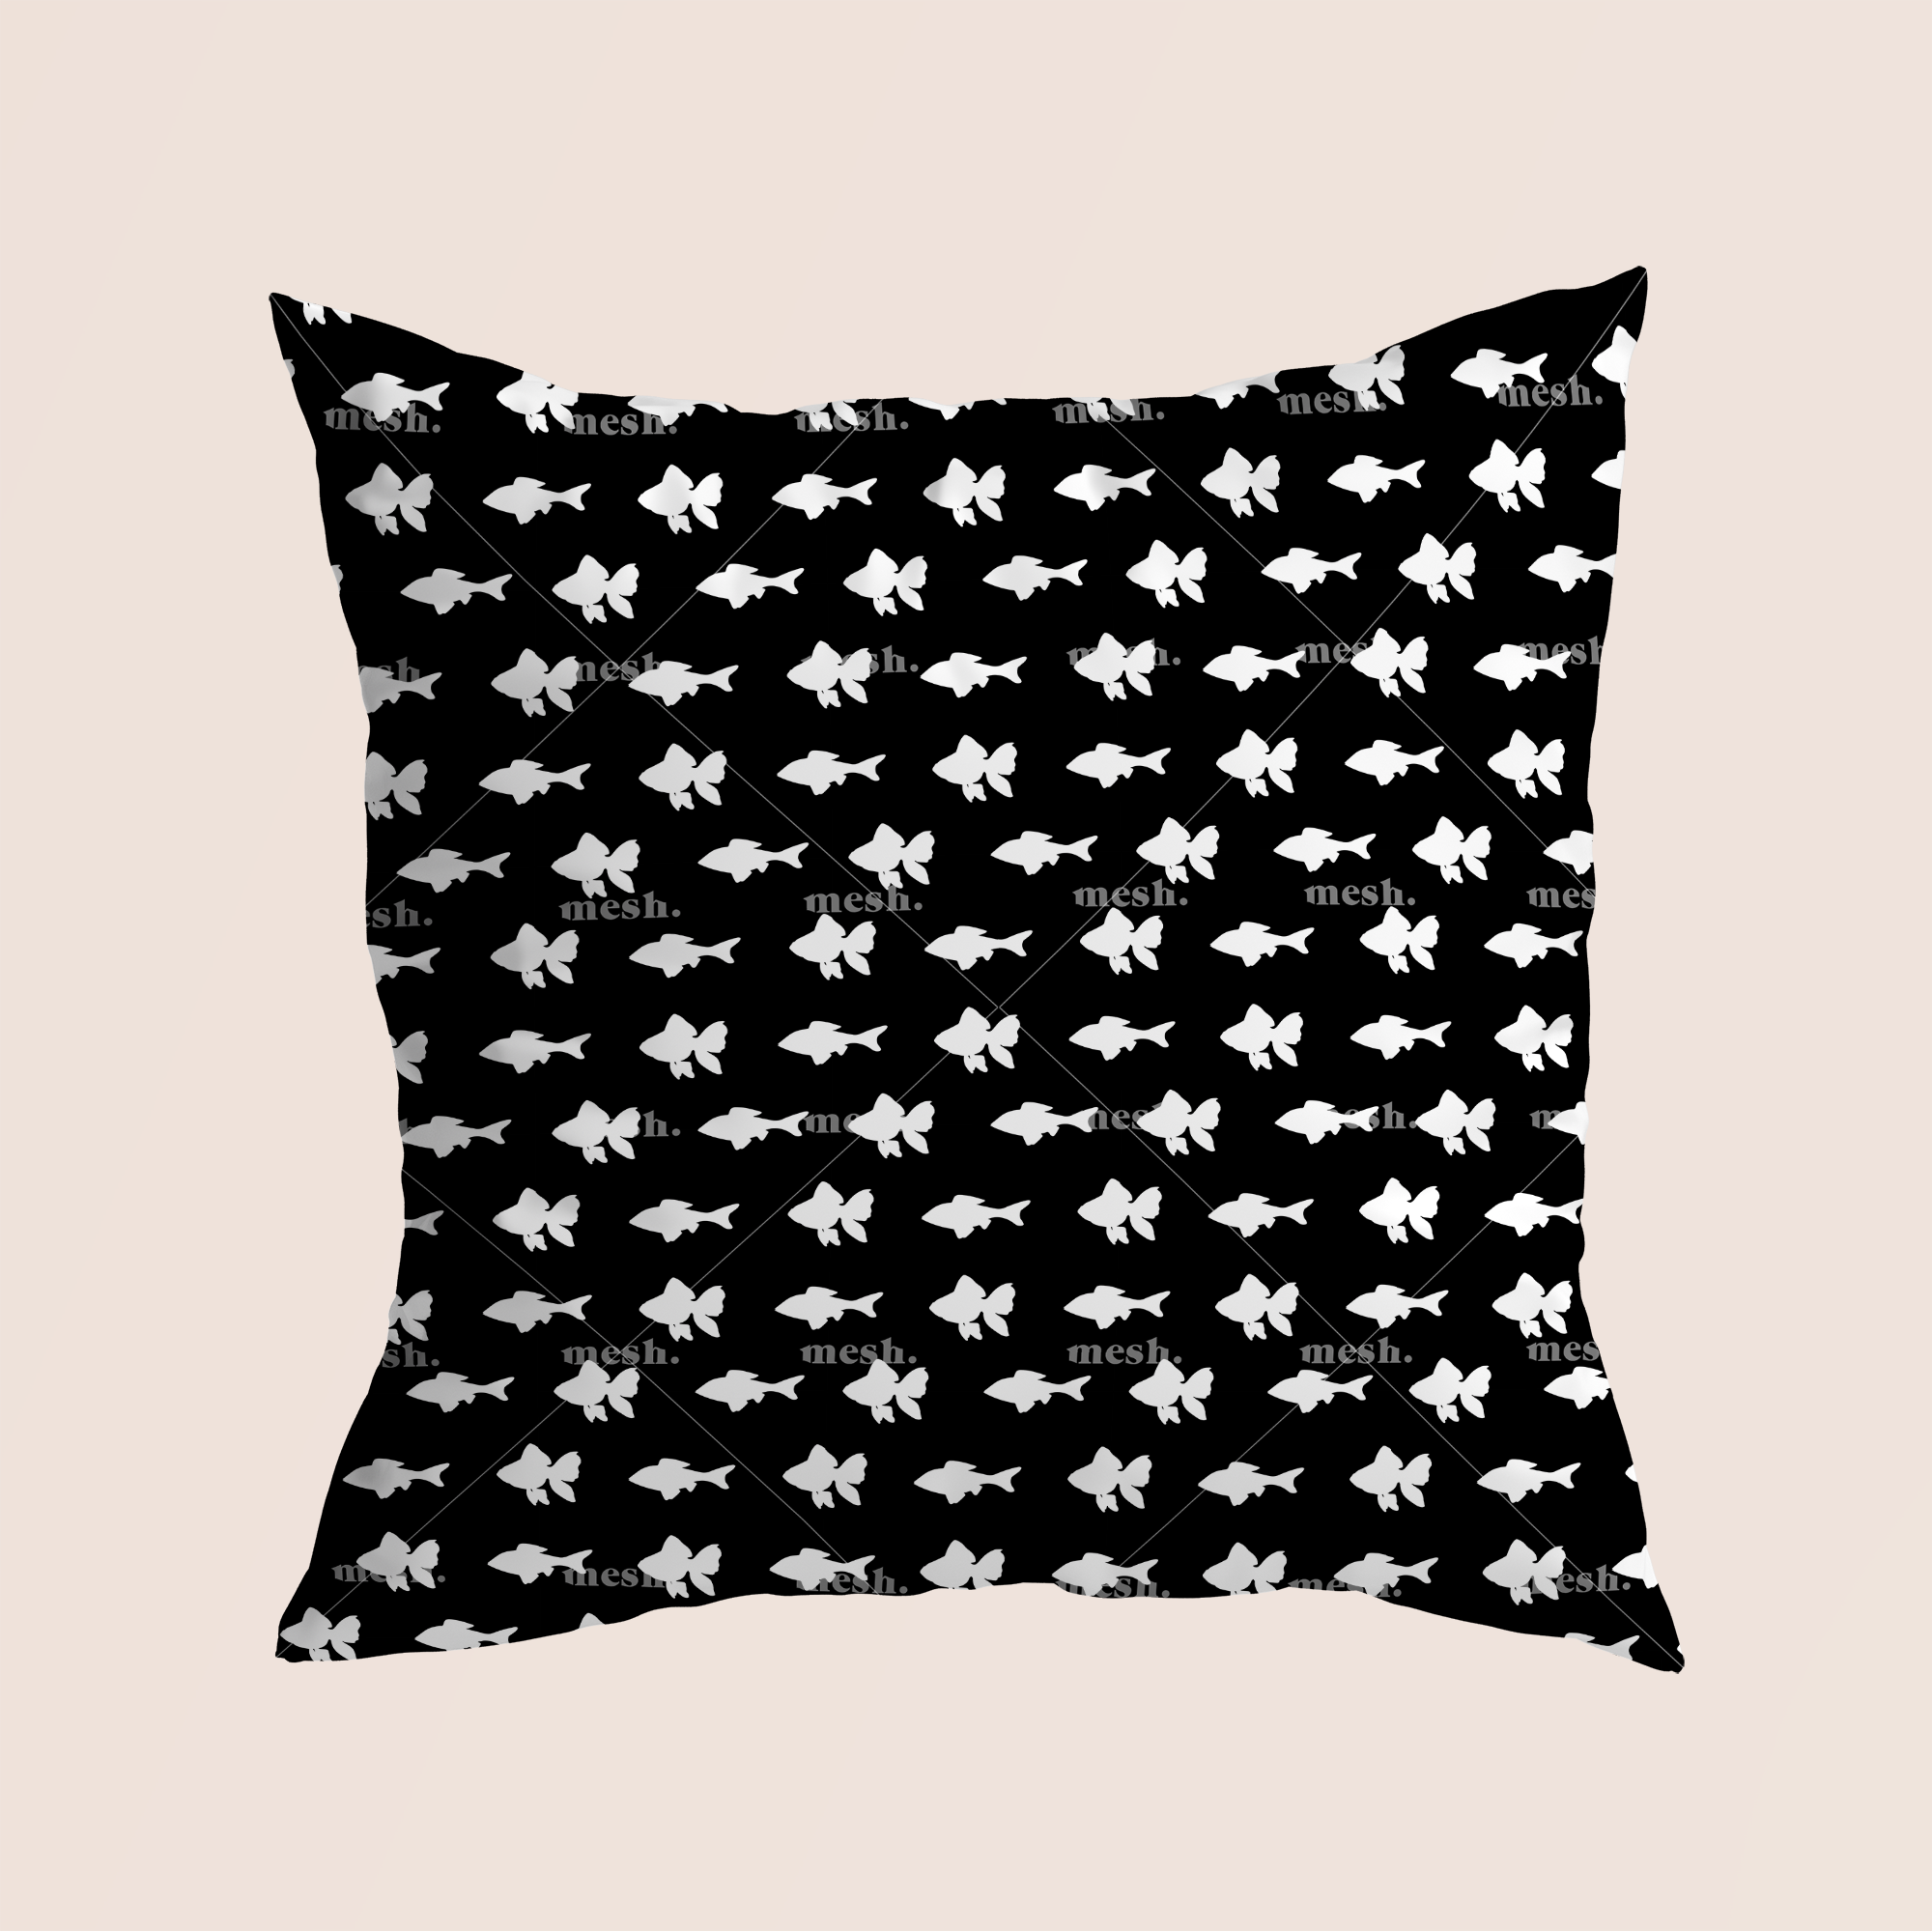 Under the sea black & white in black pattern design printed on recycled fabric pillow